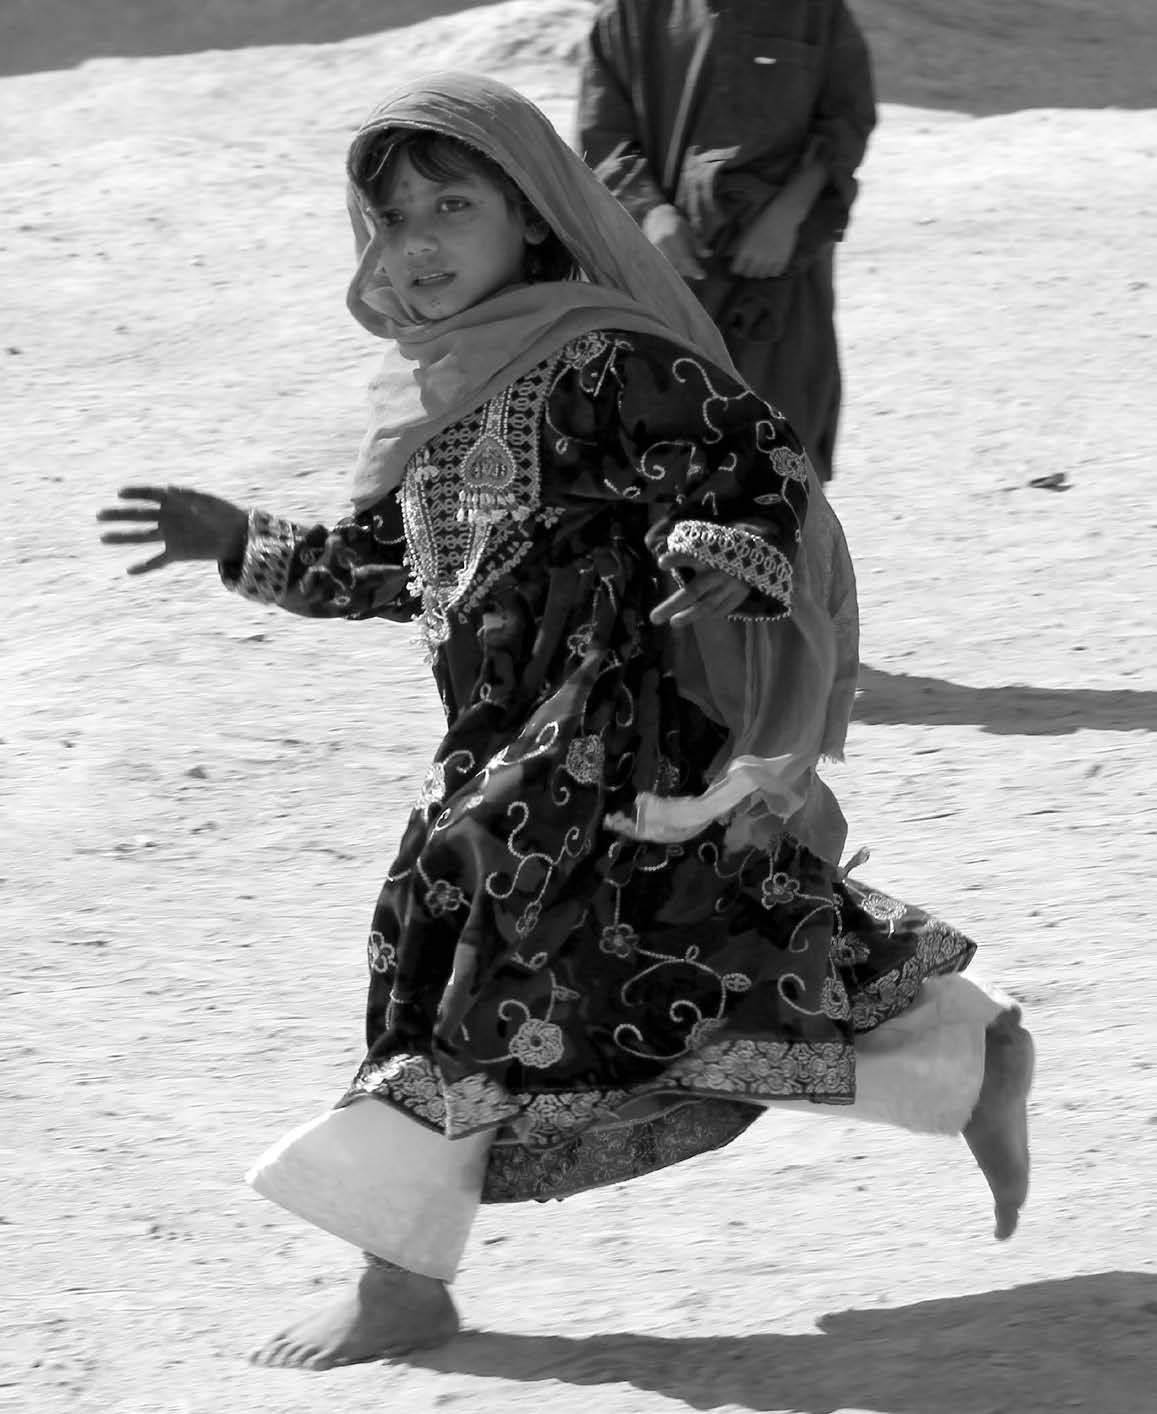 A barefoot Afghan girl scurries away from American soldiers who were patrolling her village. Courtesy of J. Joseph DuWors.